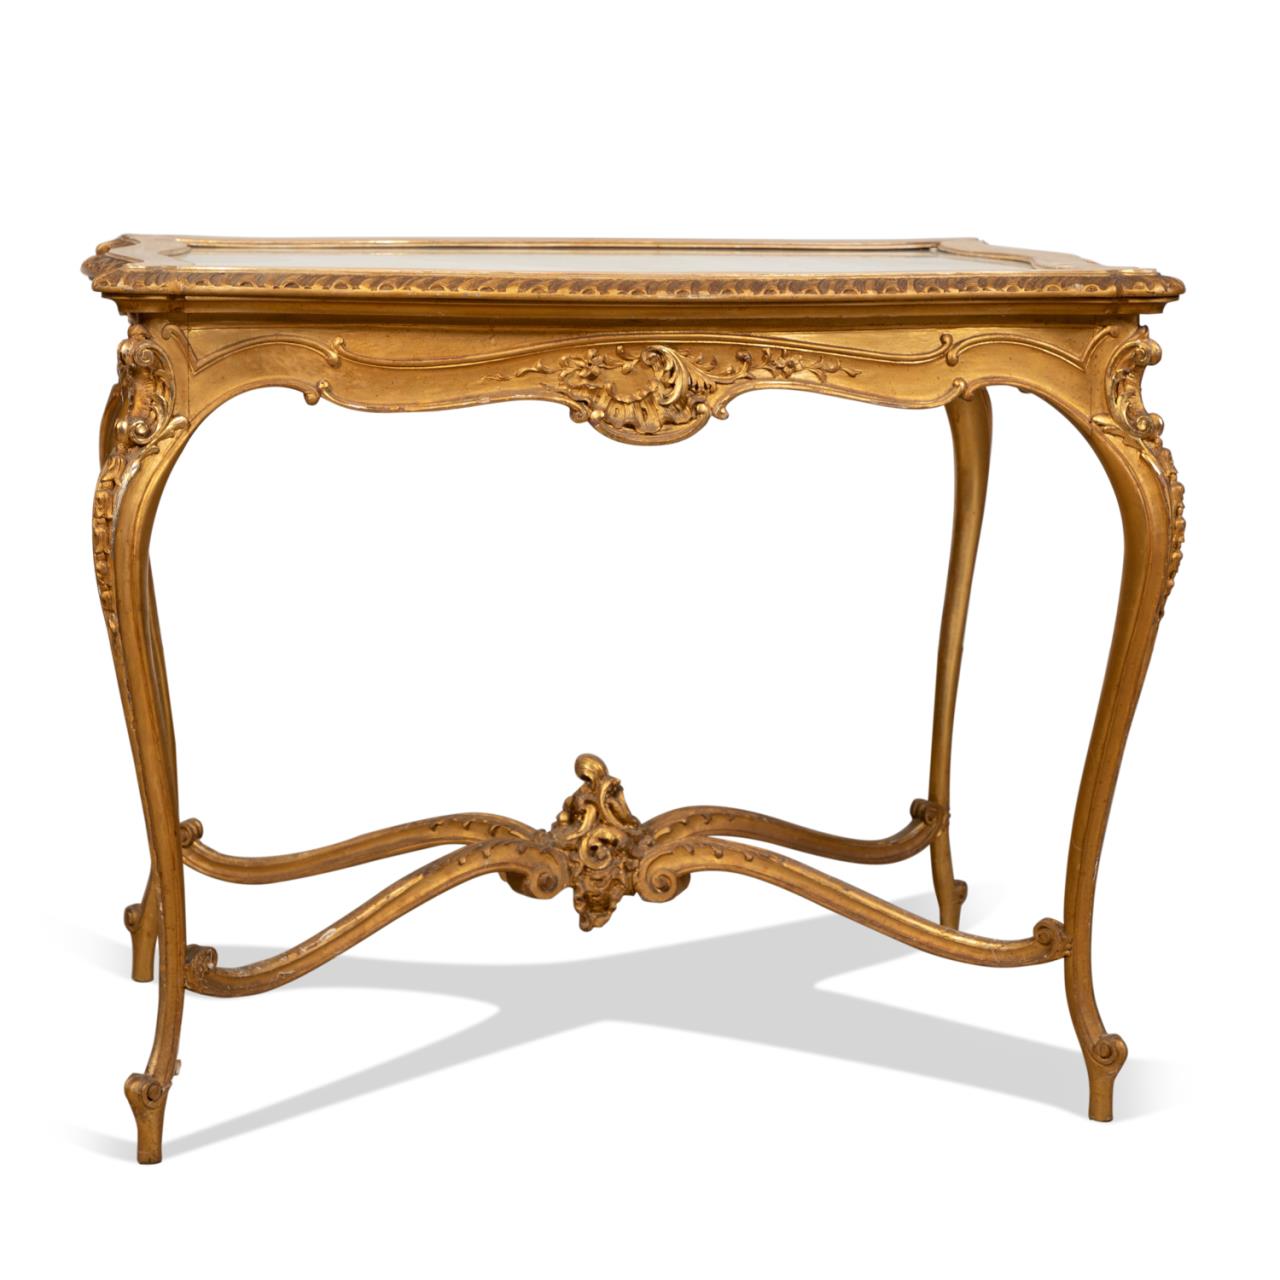 ROCOCO STYLE GILTWOOD TABLE WITH